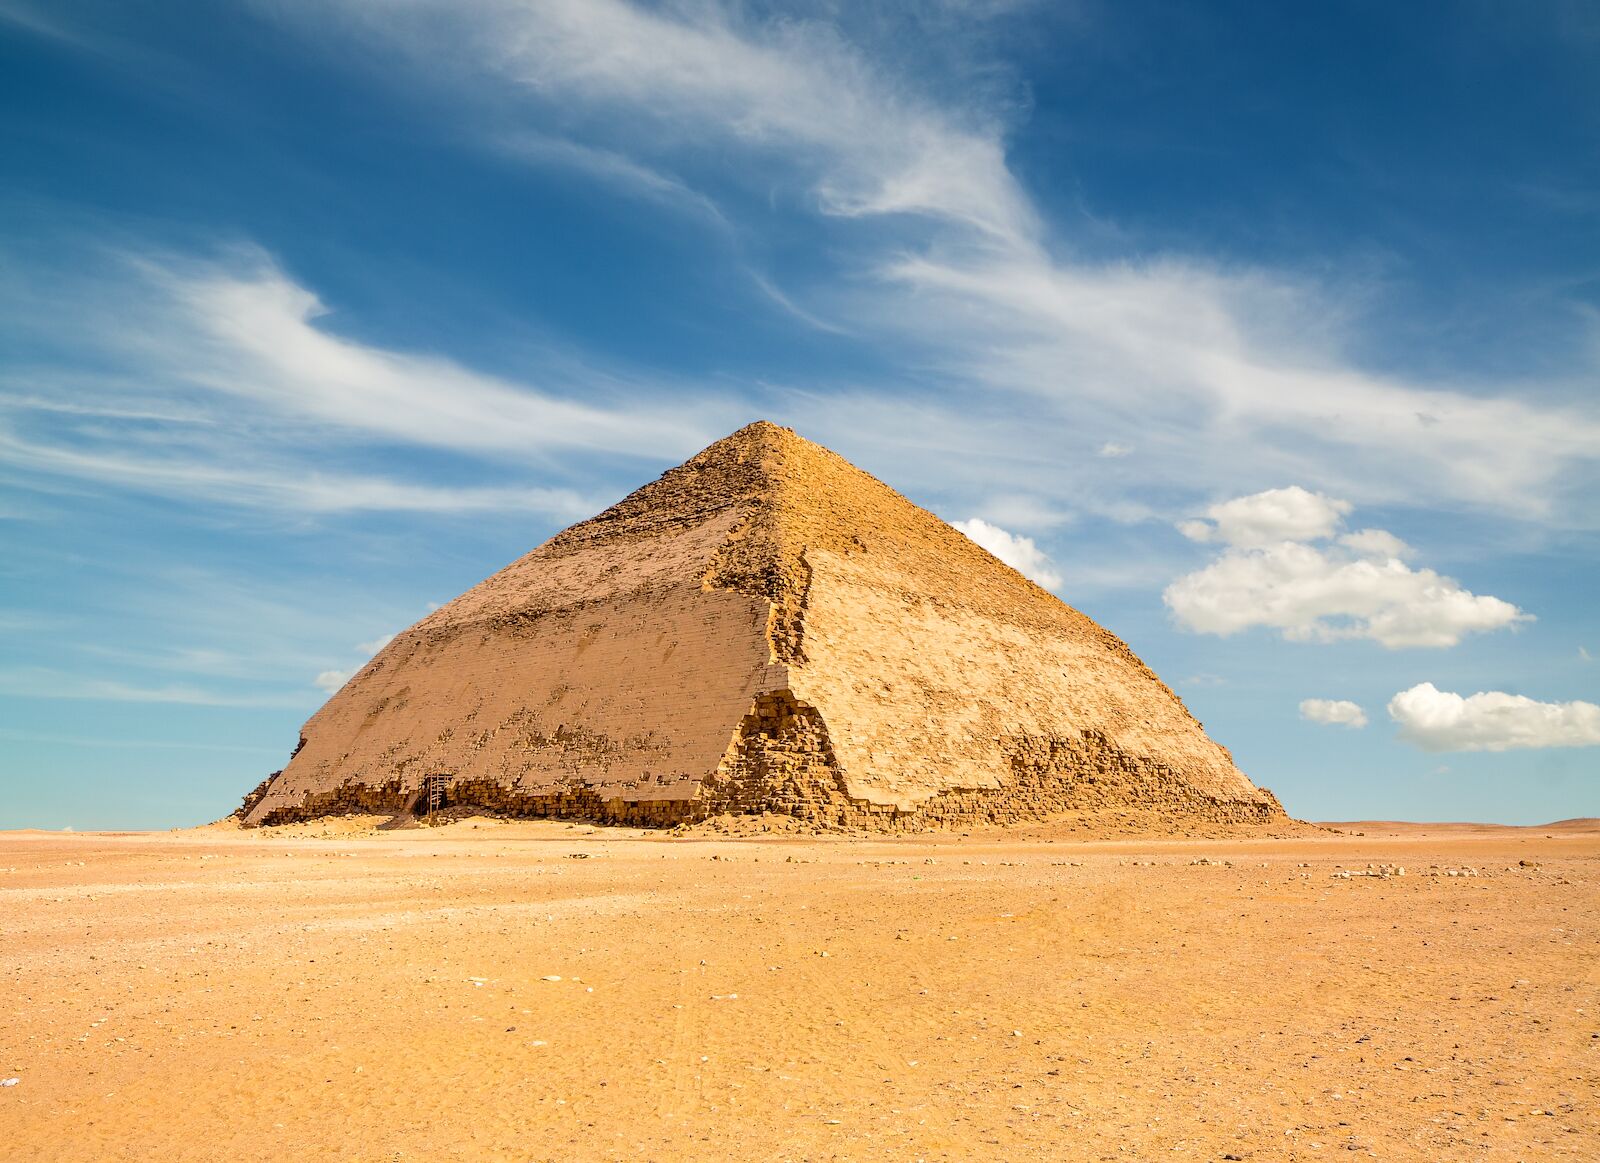 Pyramid mysteries: The Bent Pyramid in Egypt